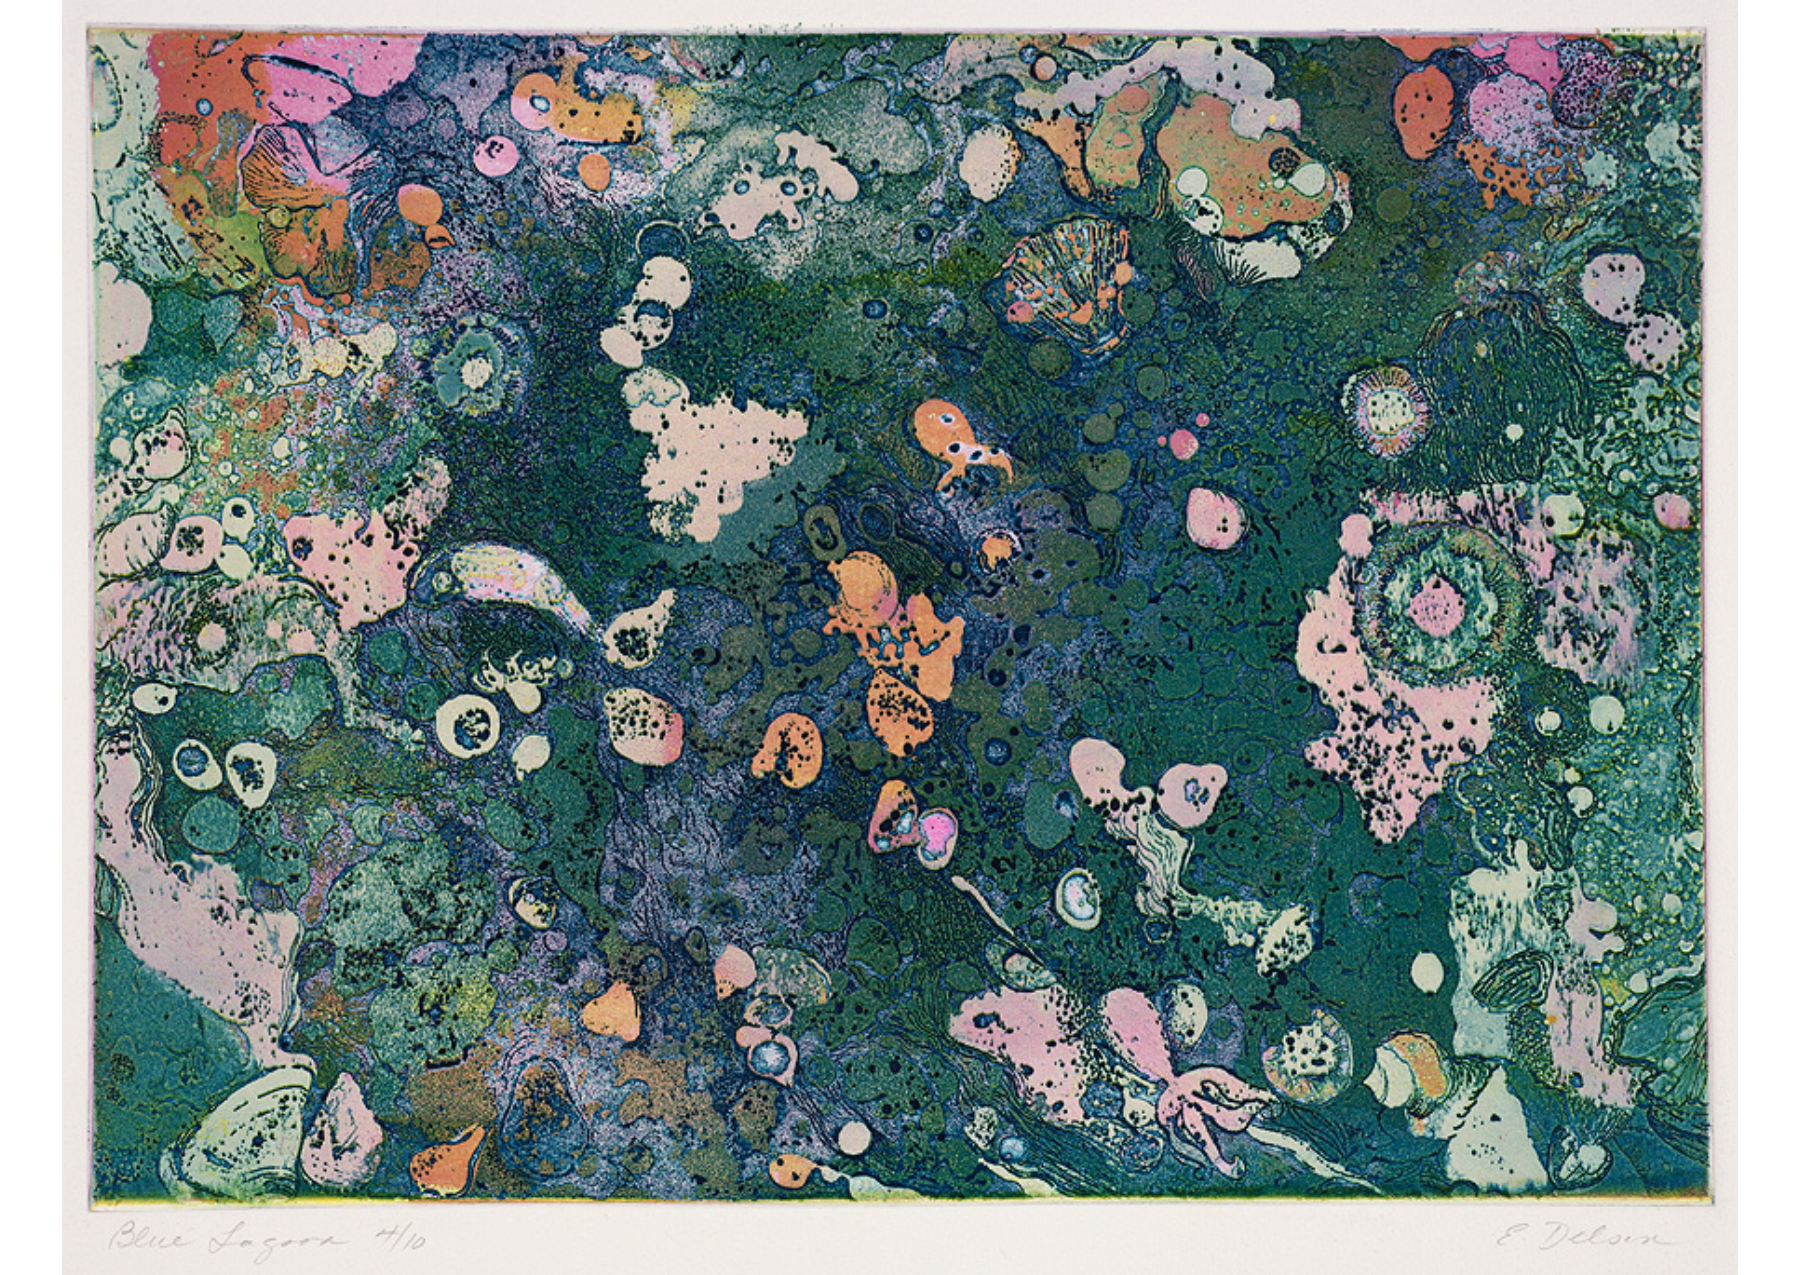 Abstract, textured green surface with white, pink, and orange blooms of color.